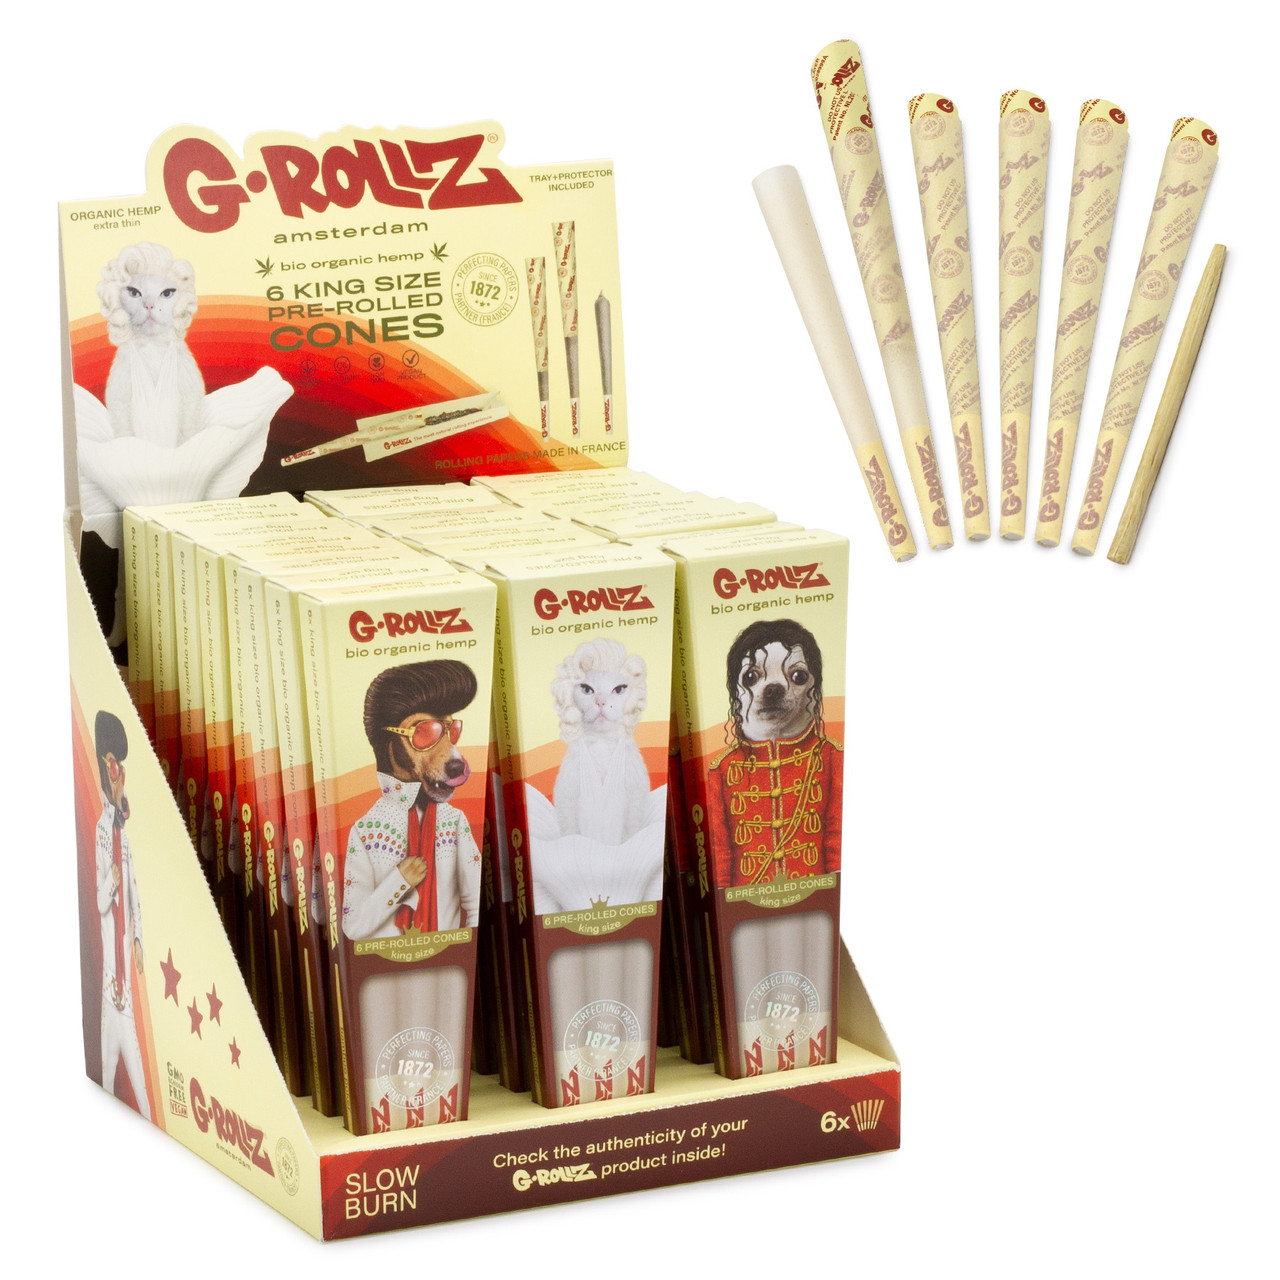  G-Rollz Pets Rock 6 King Size Pre-Rolled Cones